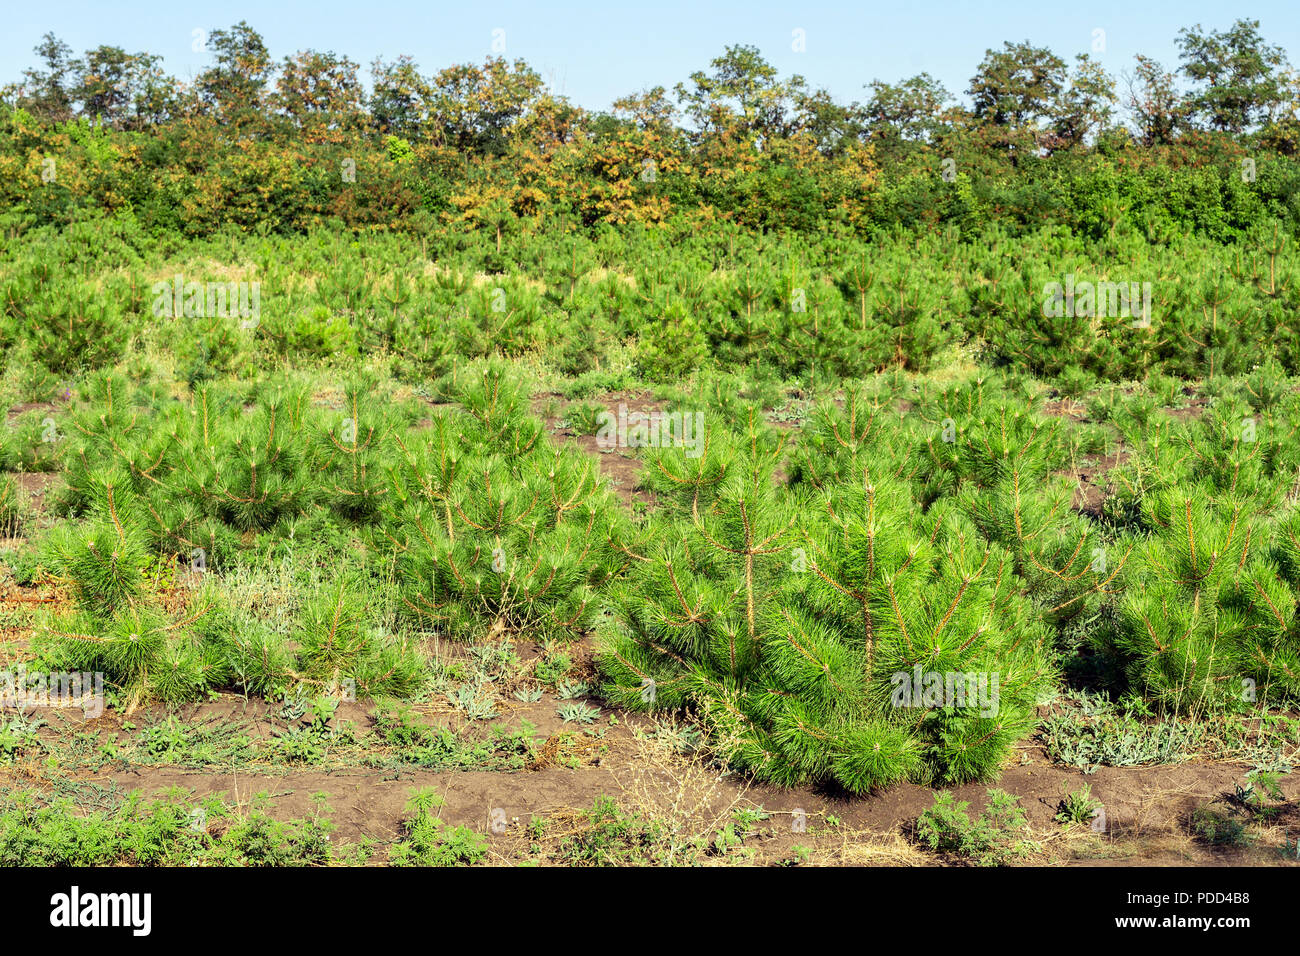 Rows of small bright pine trees at coniferous nursery garden. Growing young conifers at open air gardening plantation Stock Photo